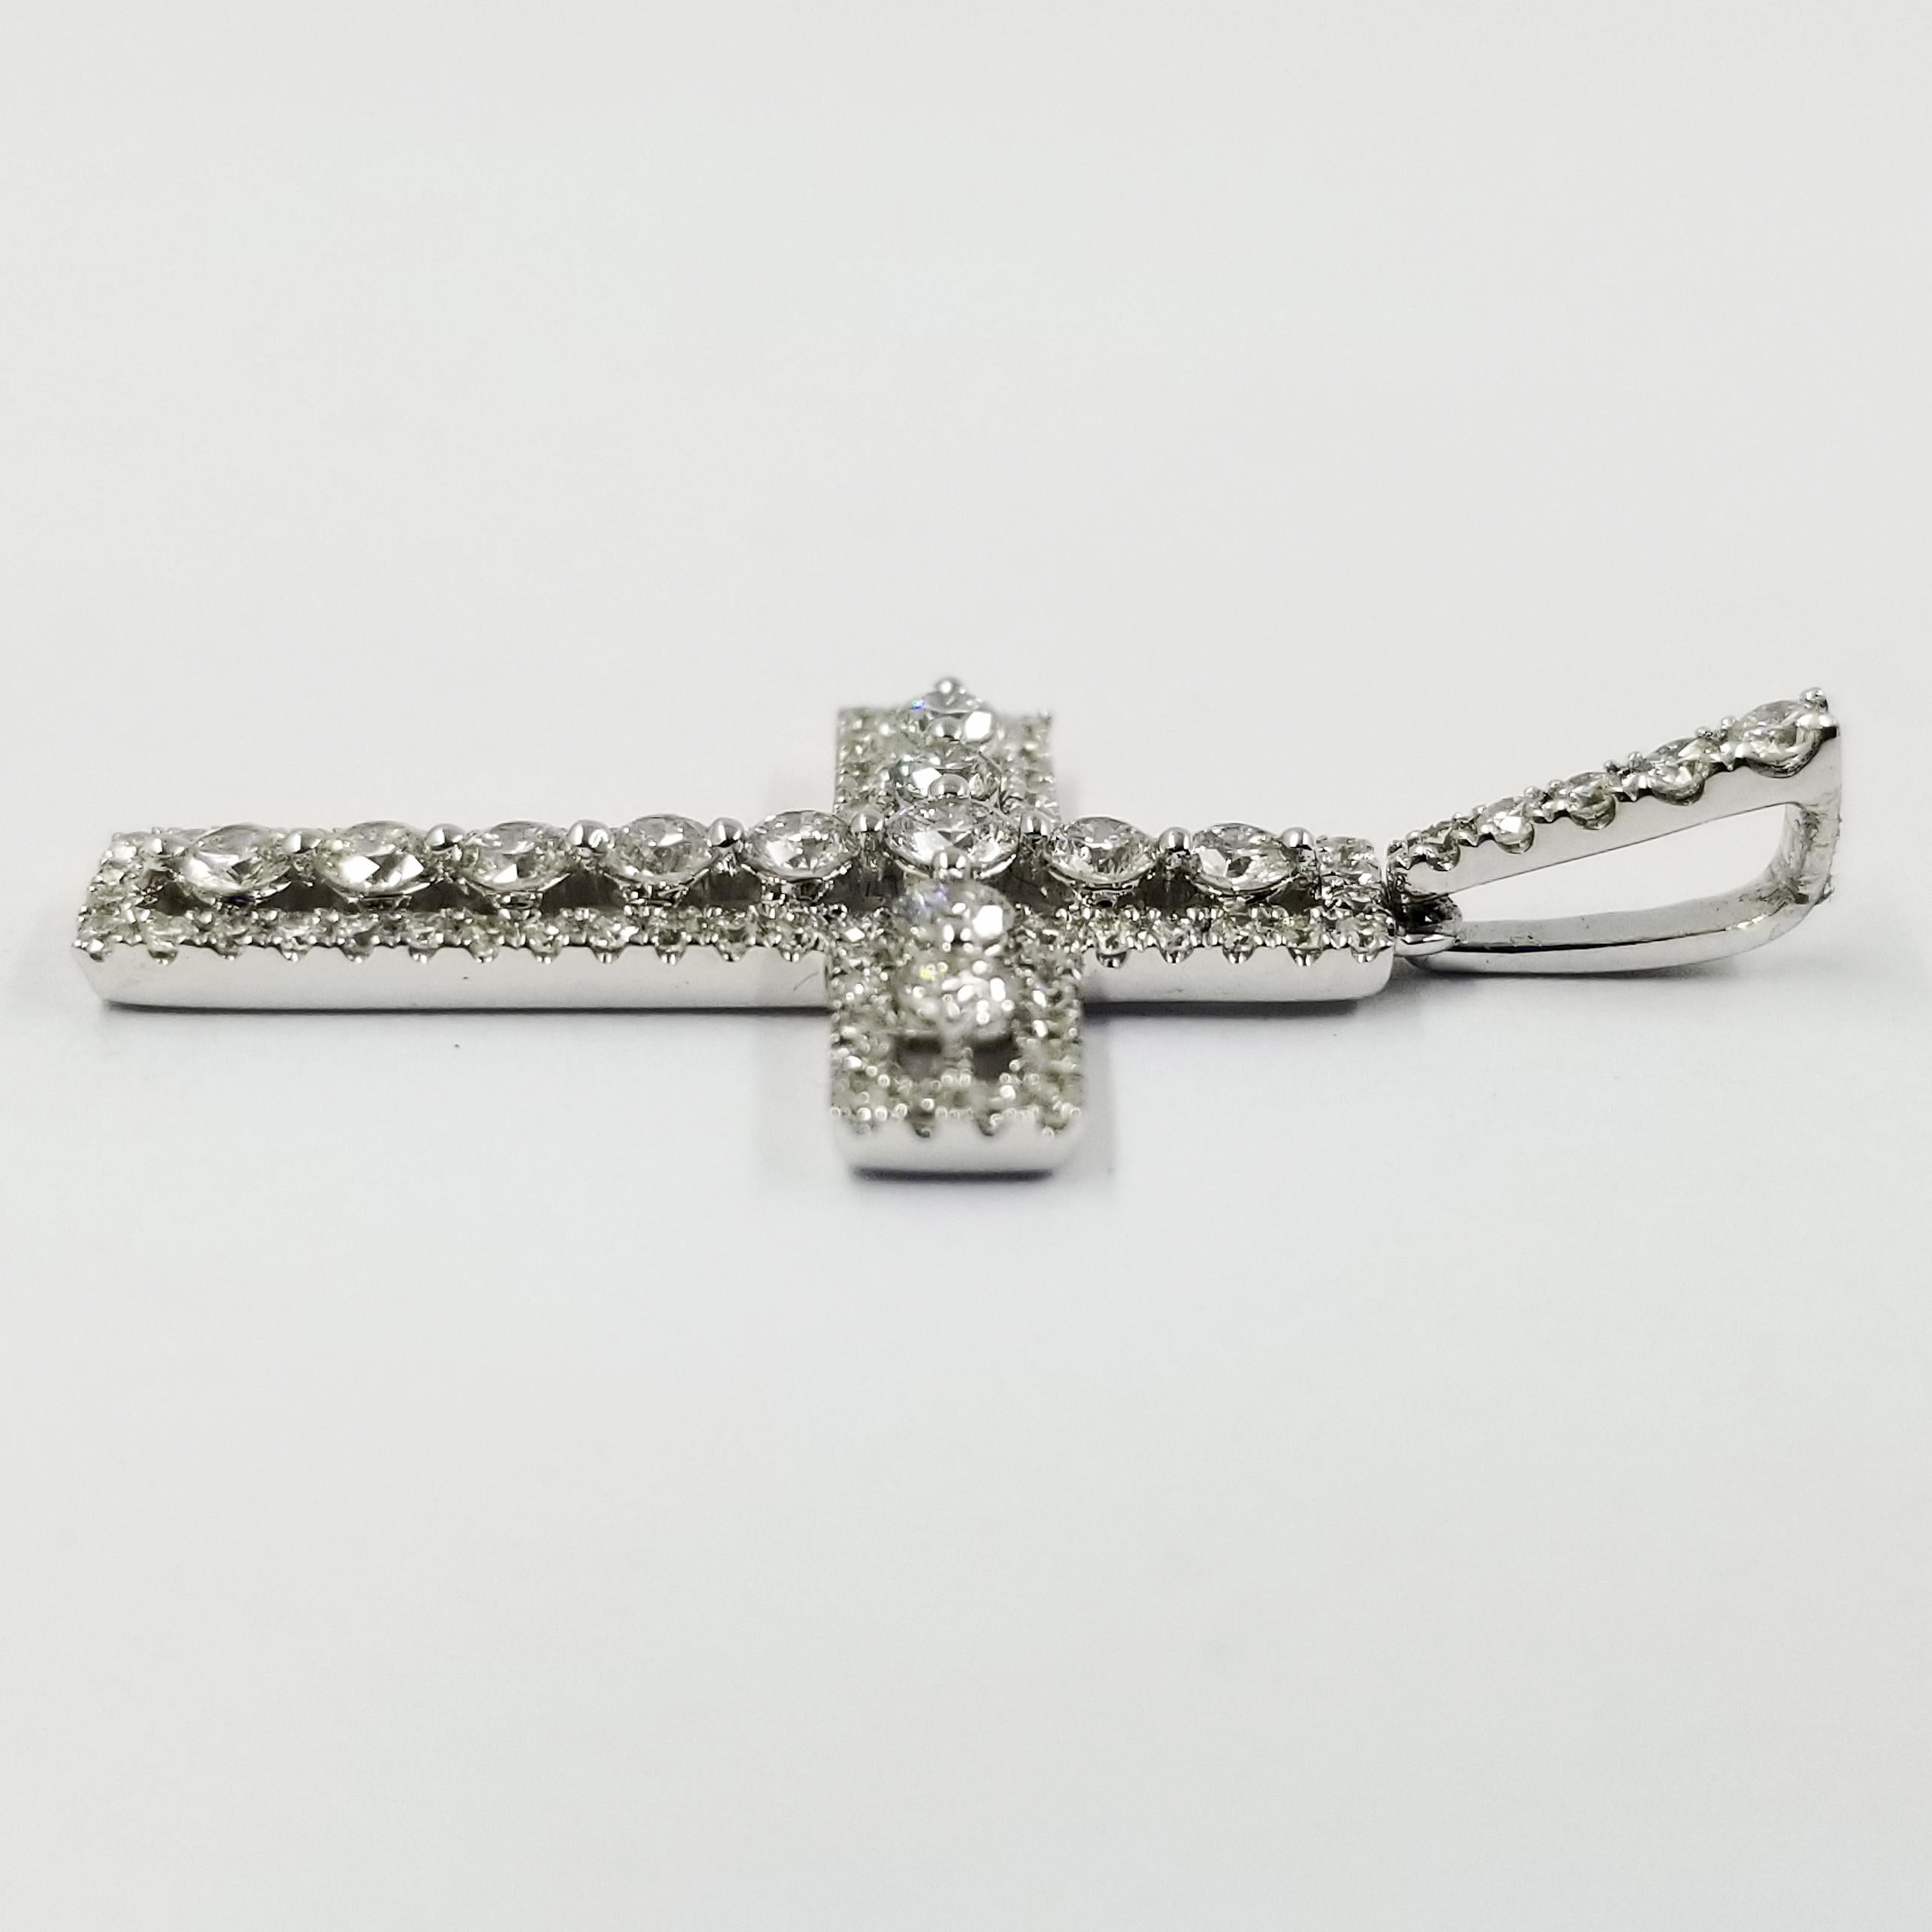 18 Karat White Gold Cross Featuring 83 Round Diamonds Totaling 0.77 Carats of SI Clarity & G Color. The Large Bale Allows for a Variety of Chains To Slide Through.